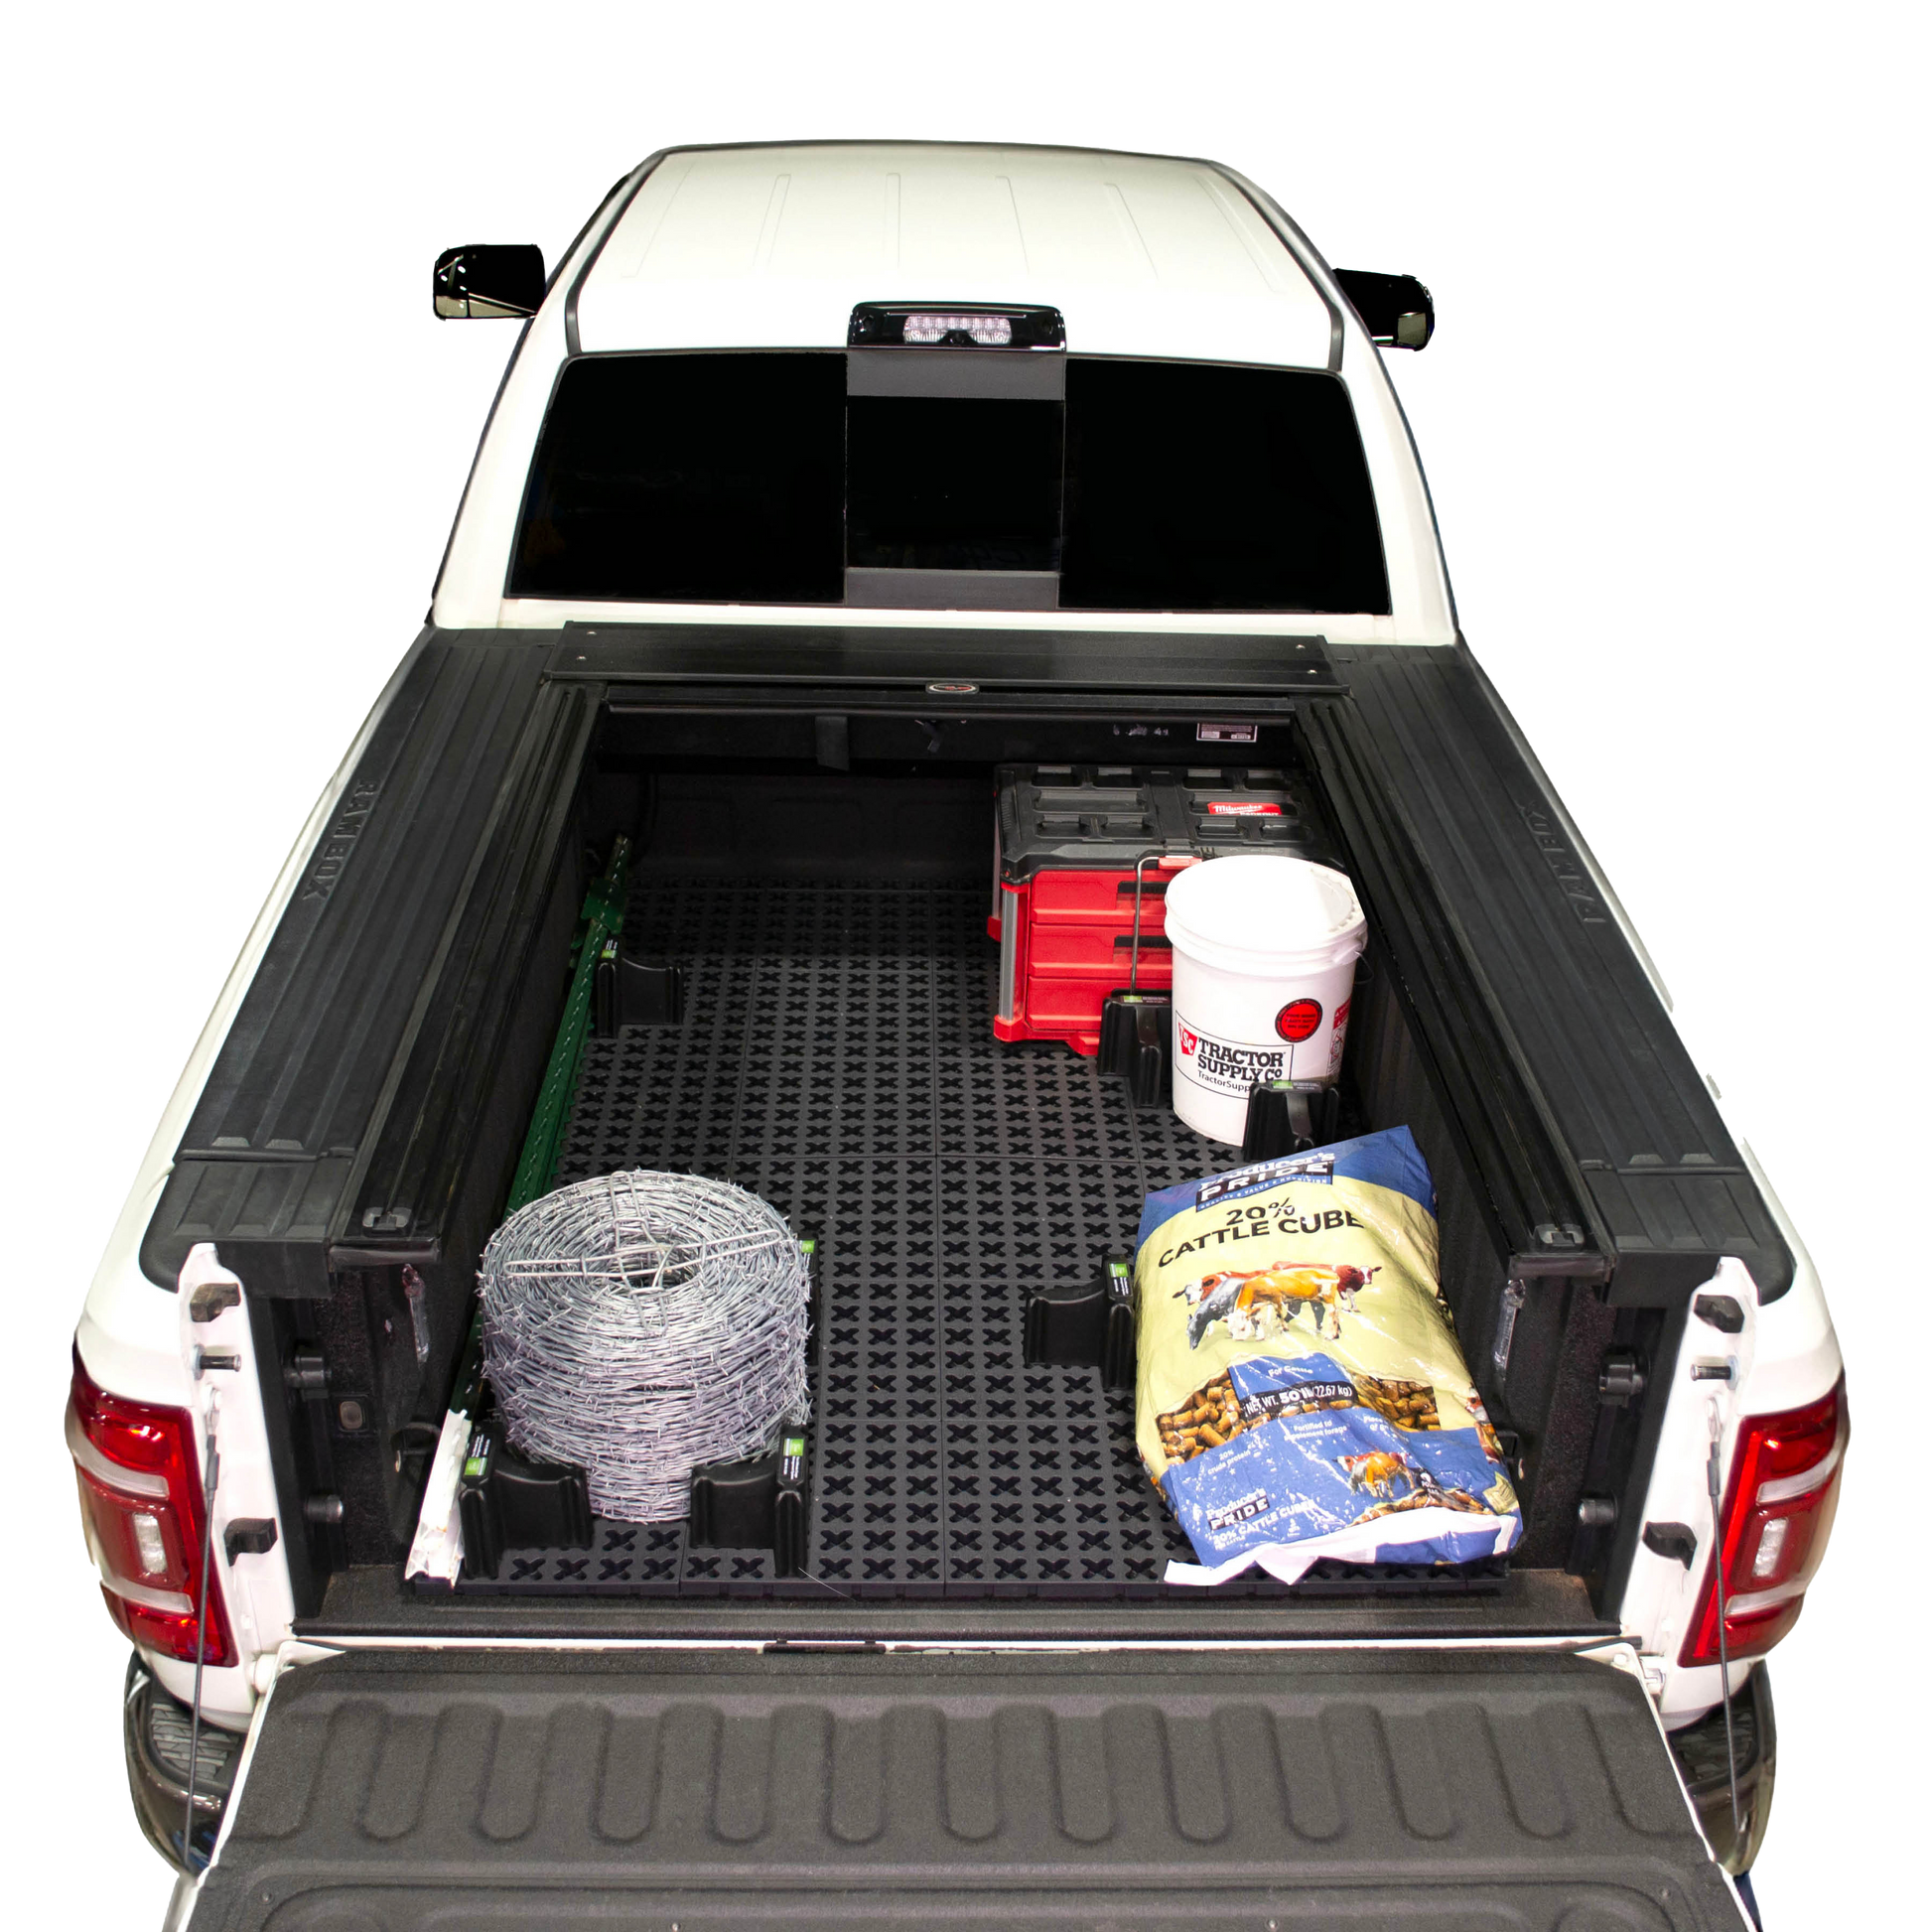 Tmat Cargo System in a Ram 2500 pickup bed with a bucket, t-posts, barb wire, and Milwaukee Packout toolbox.